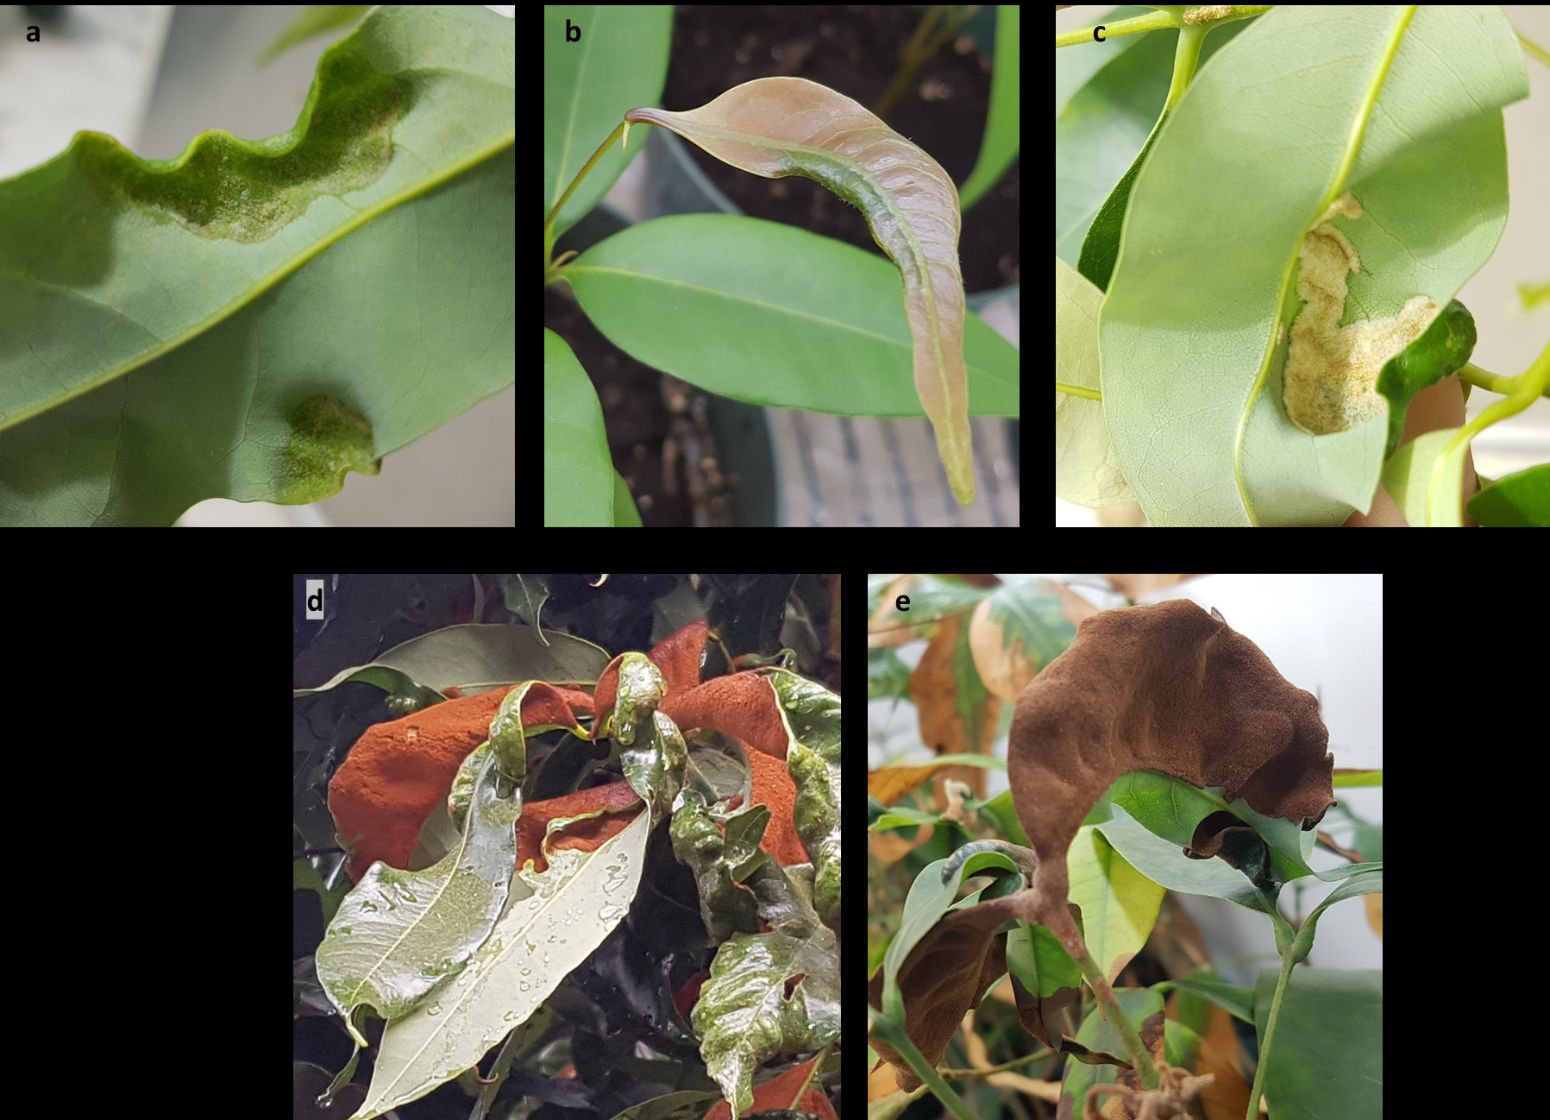 Erinea development on leaves. a) initial hair formation on the underside of the leaves, b) initial leaf color change appears on the upper side of the new flush , c) white more dense erineum, d) amber mature erineum, e) overexploited dark brown erineum.